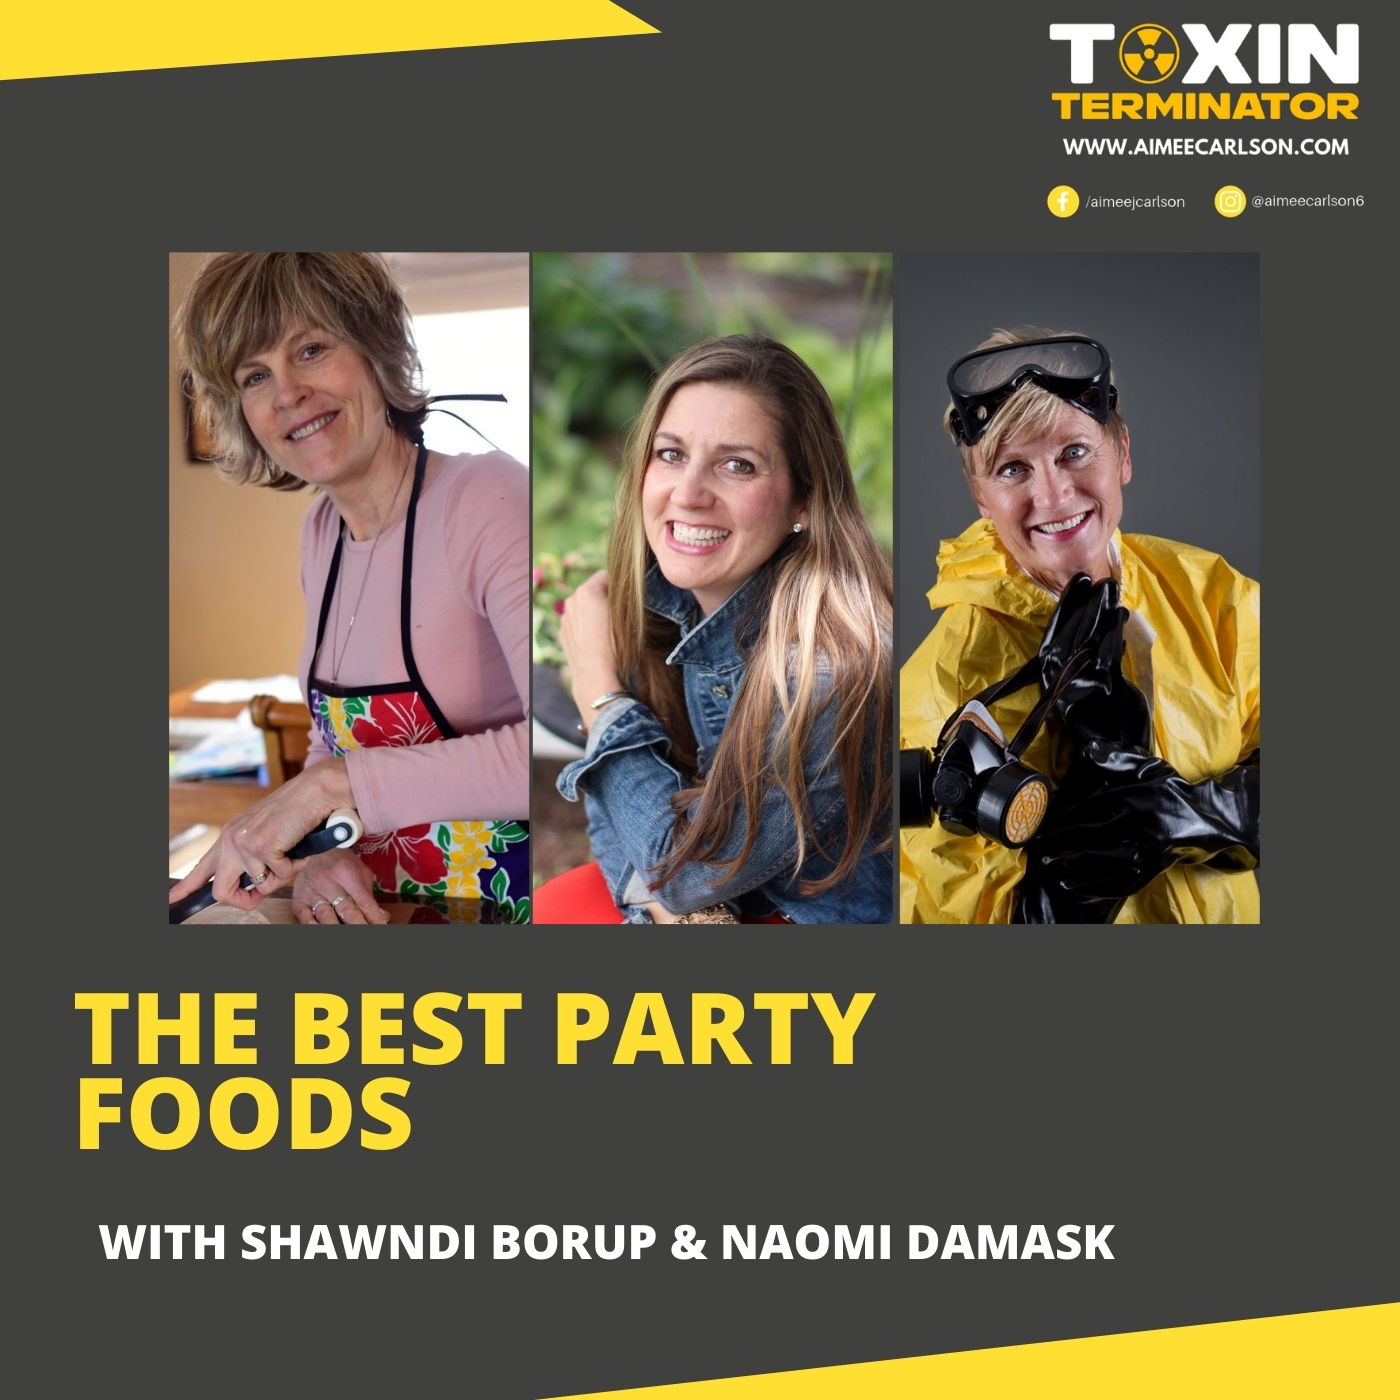 The Best Party Foods with Shawndi Borup & Naomi Damask